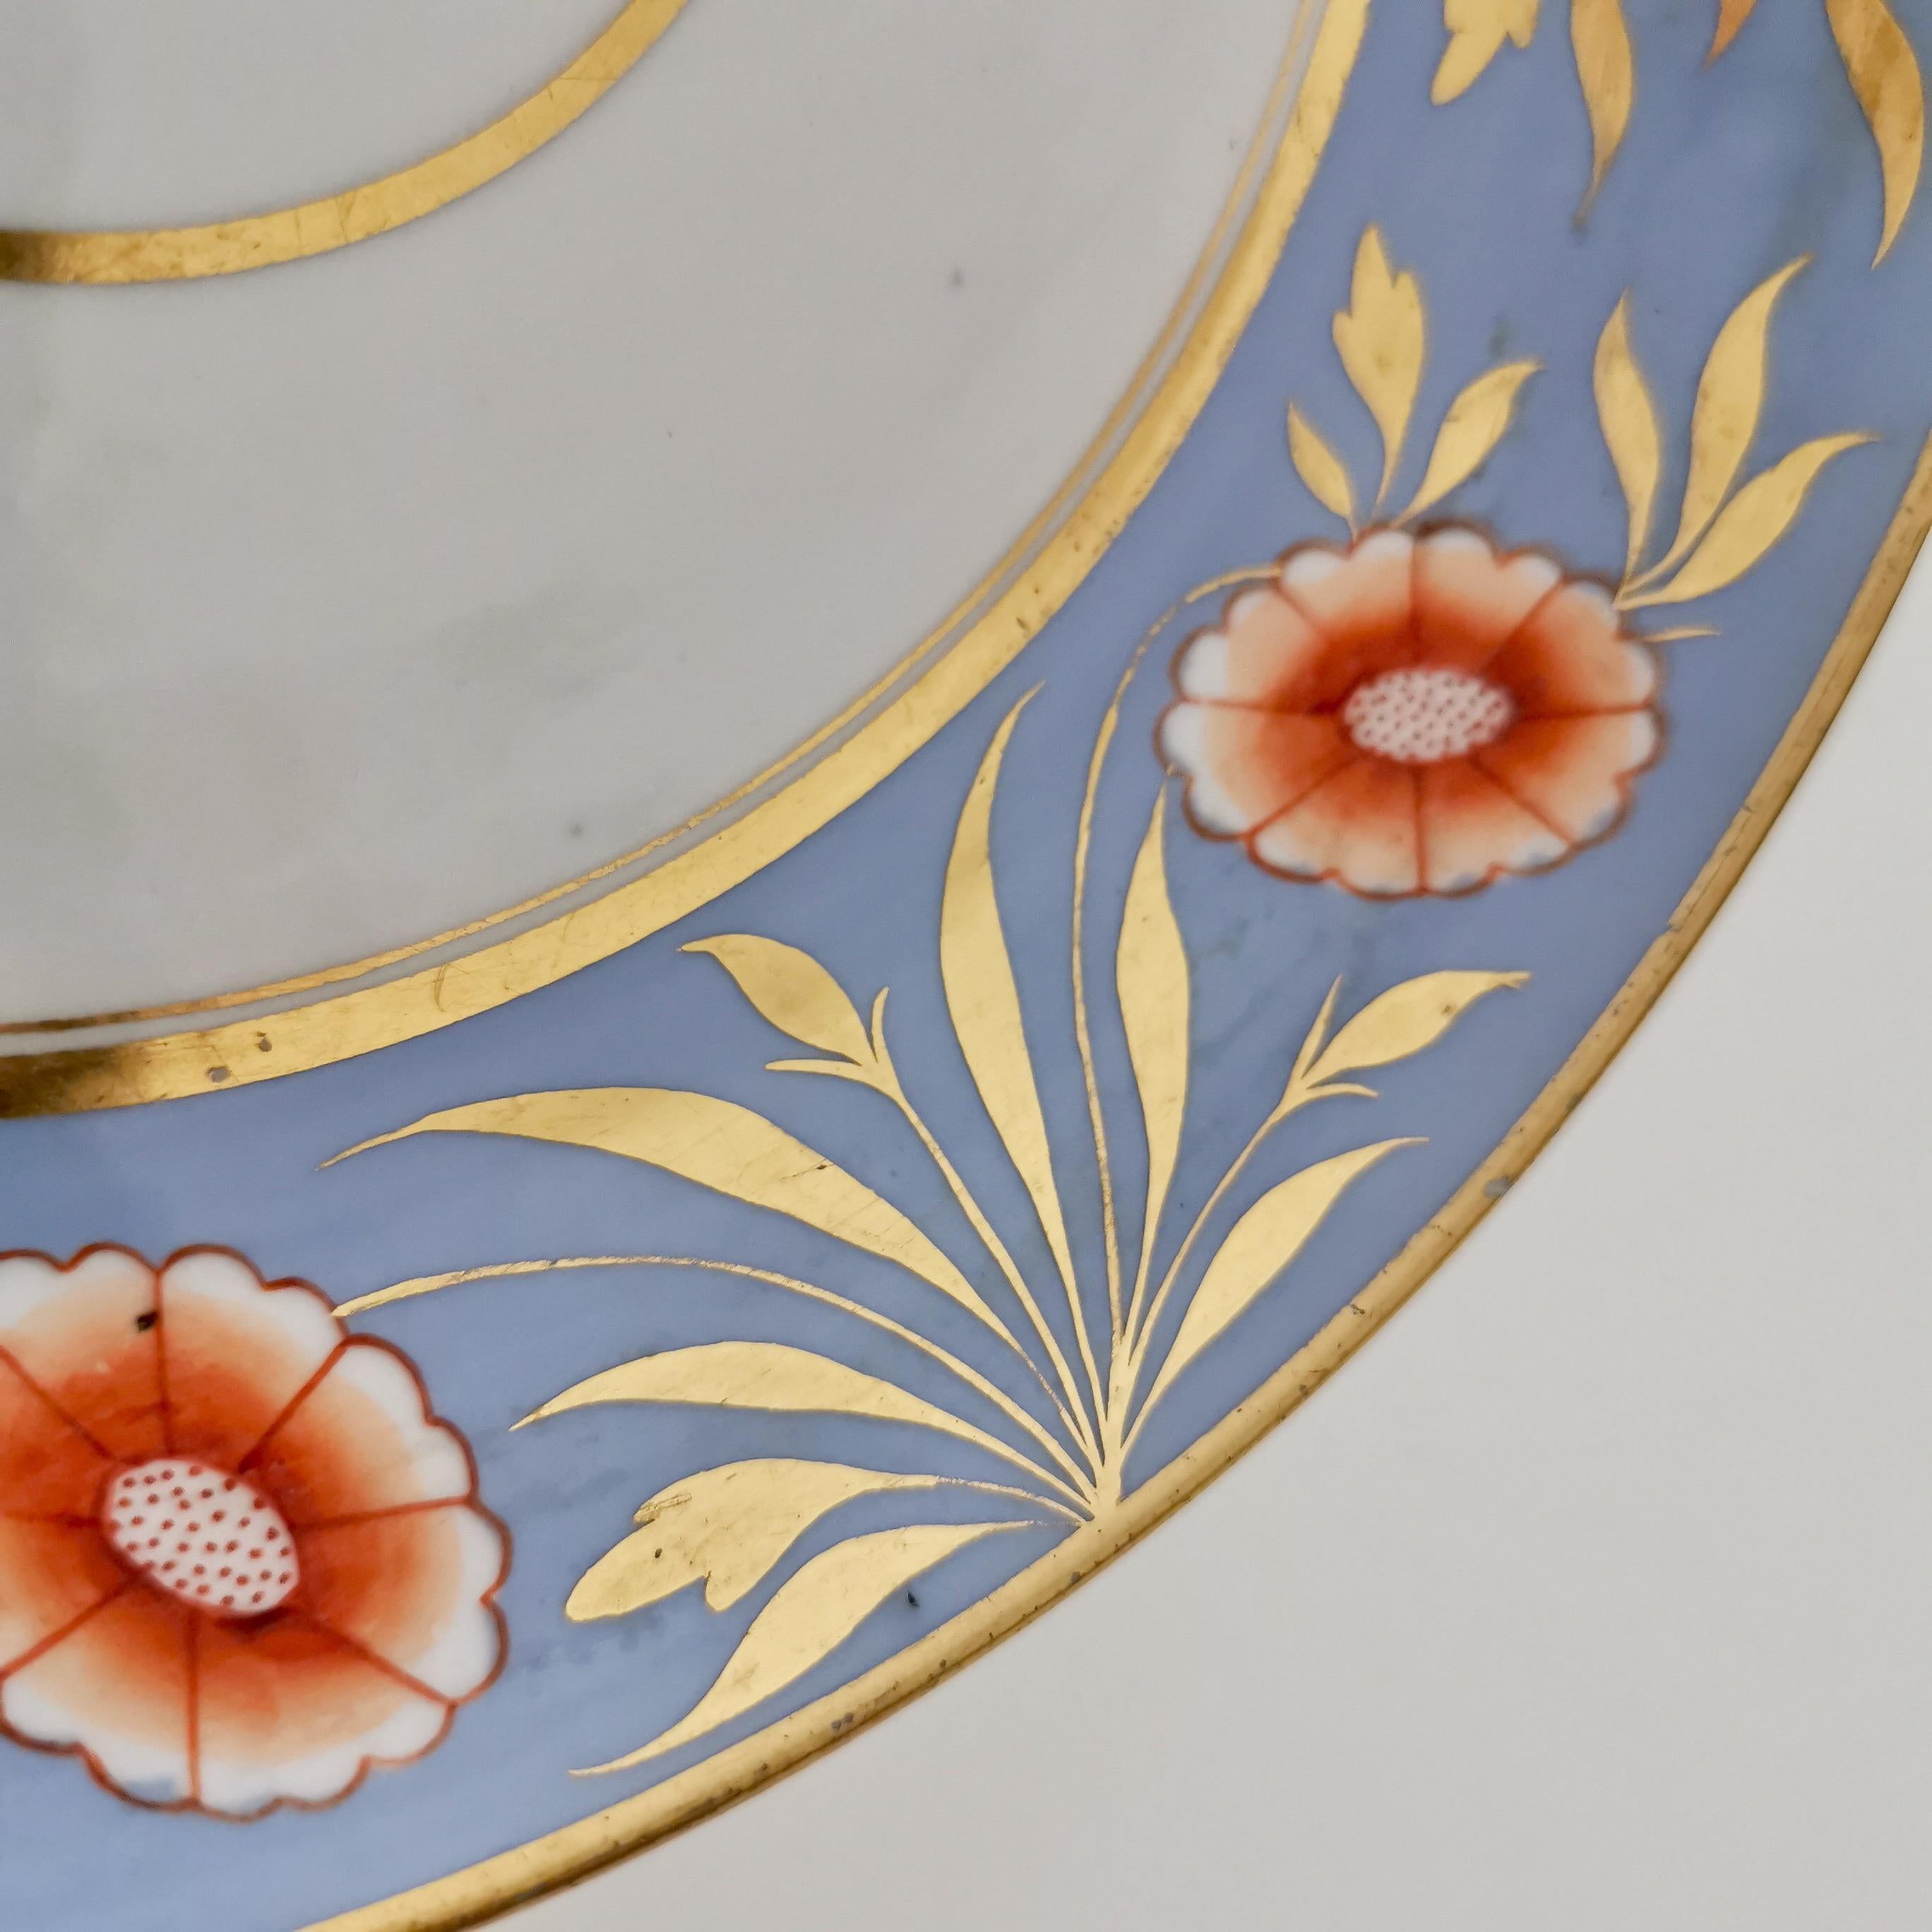 Hand-Painted Spode Deep Porcelain Plate, Periwinkle Blue with Orange Flowers, ca 1815